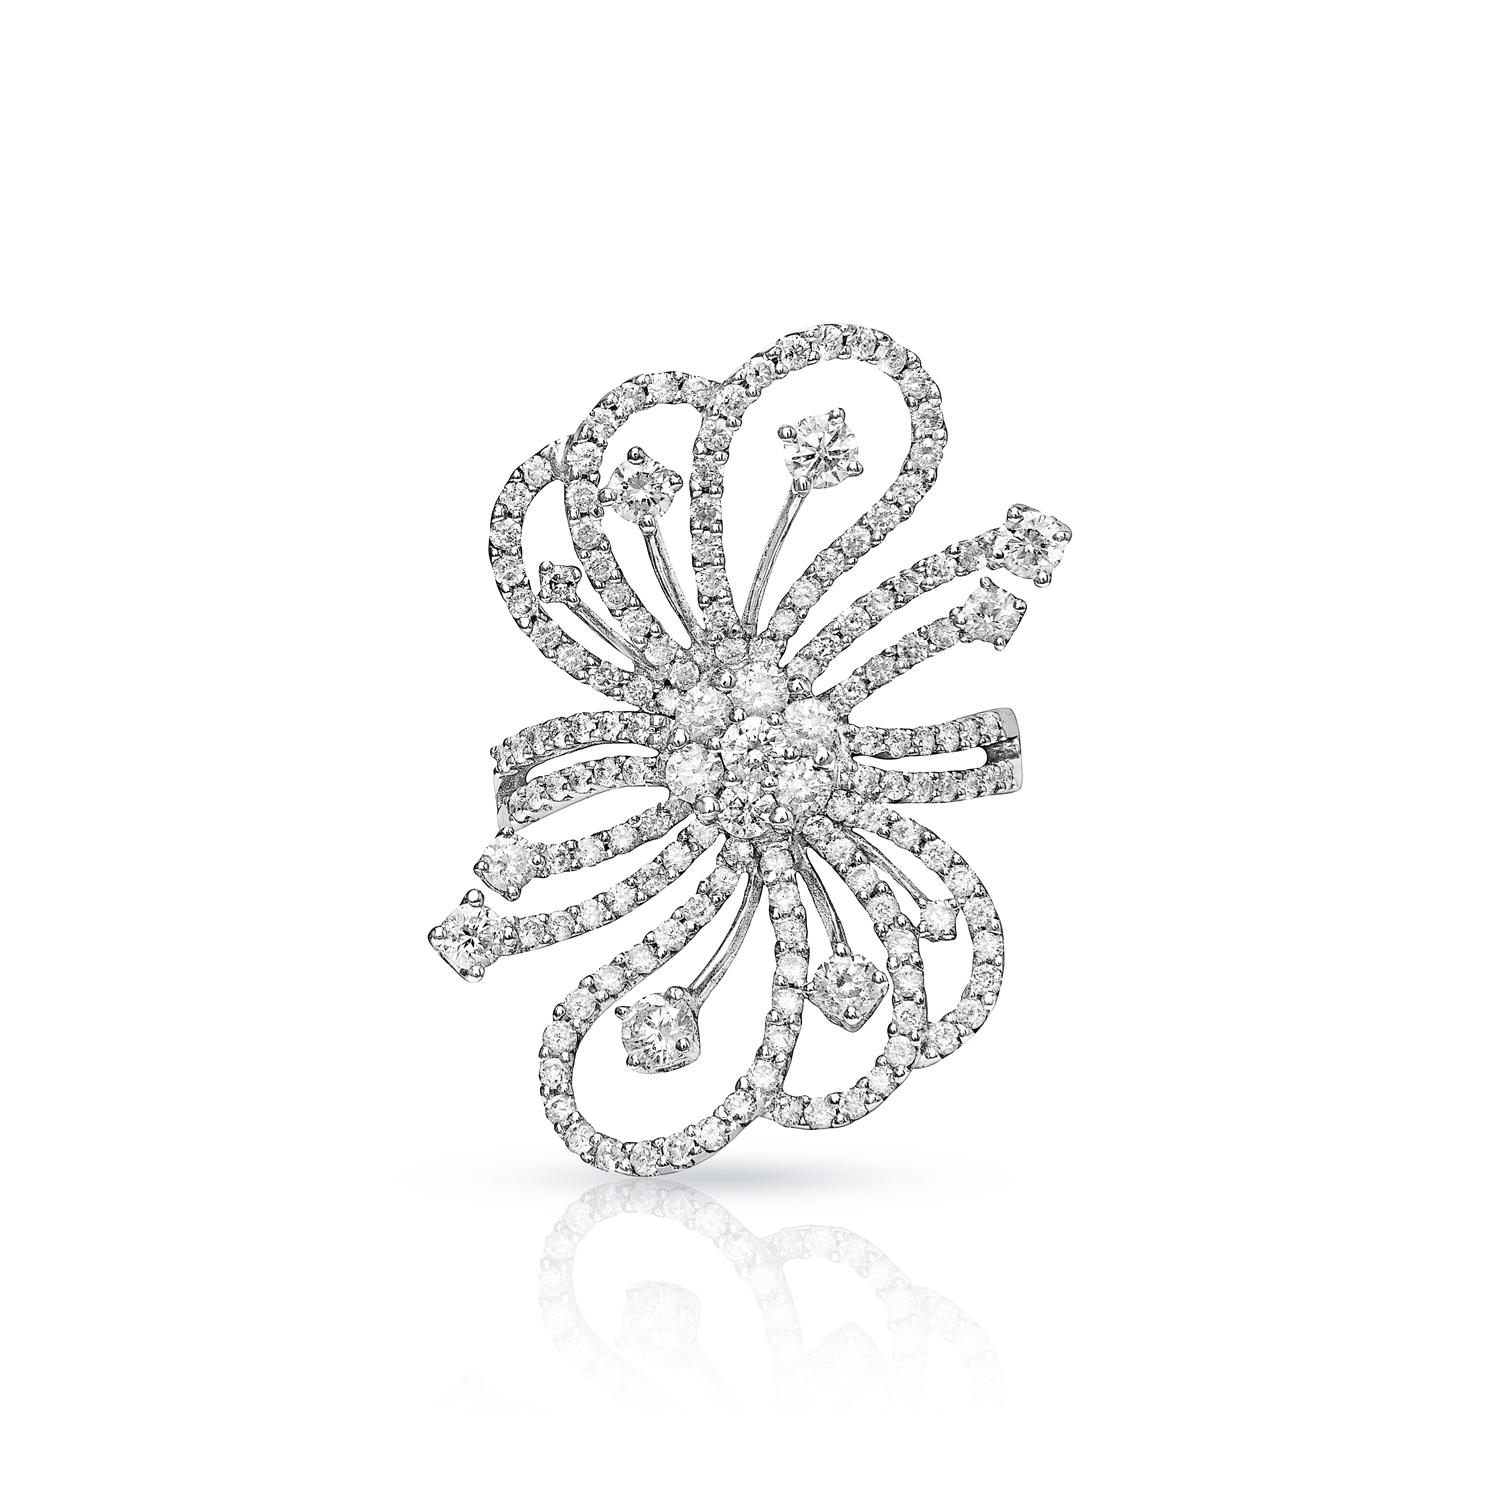 This magnificent ring features a stunning round brilliant-cut diamonds at its center, surrounded by a halo of smaller diamonds. The ring is crafted from the finest quality materials and is certified, ensuring its absolute perfection. It is sure to